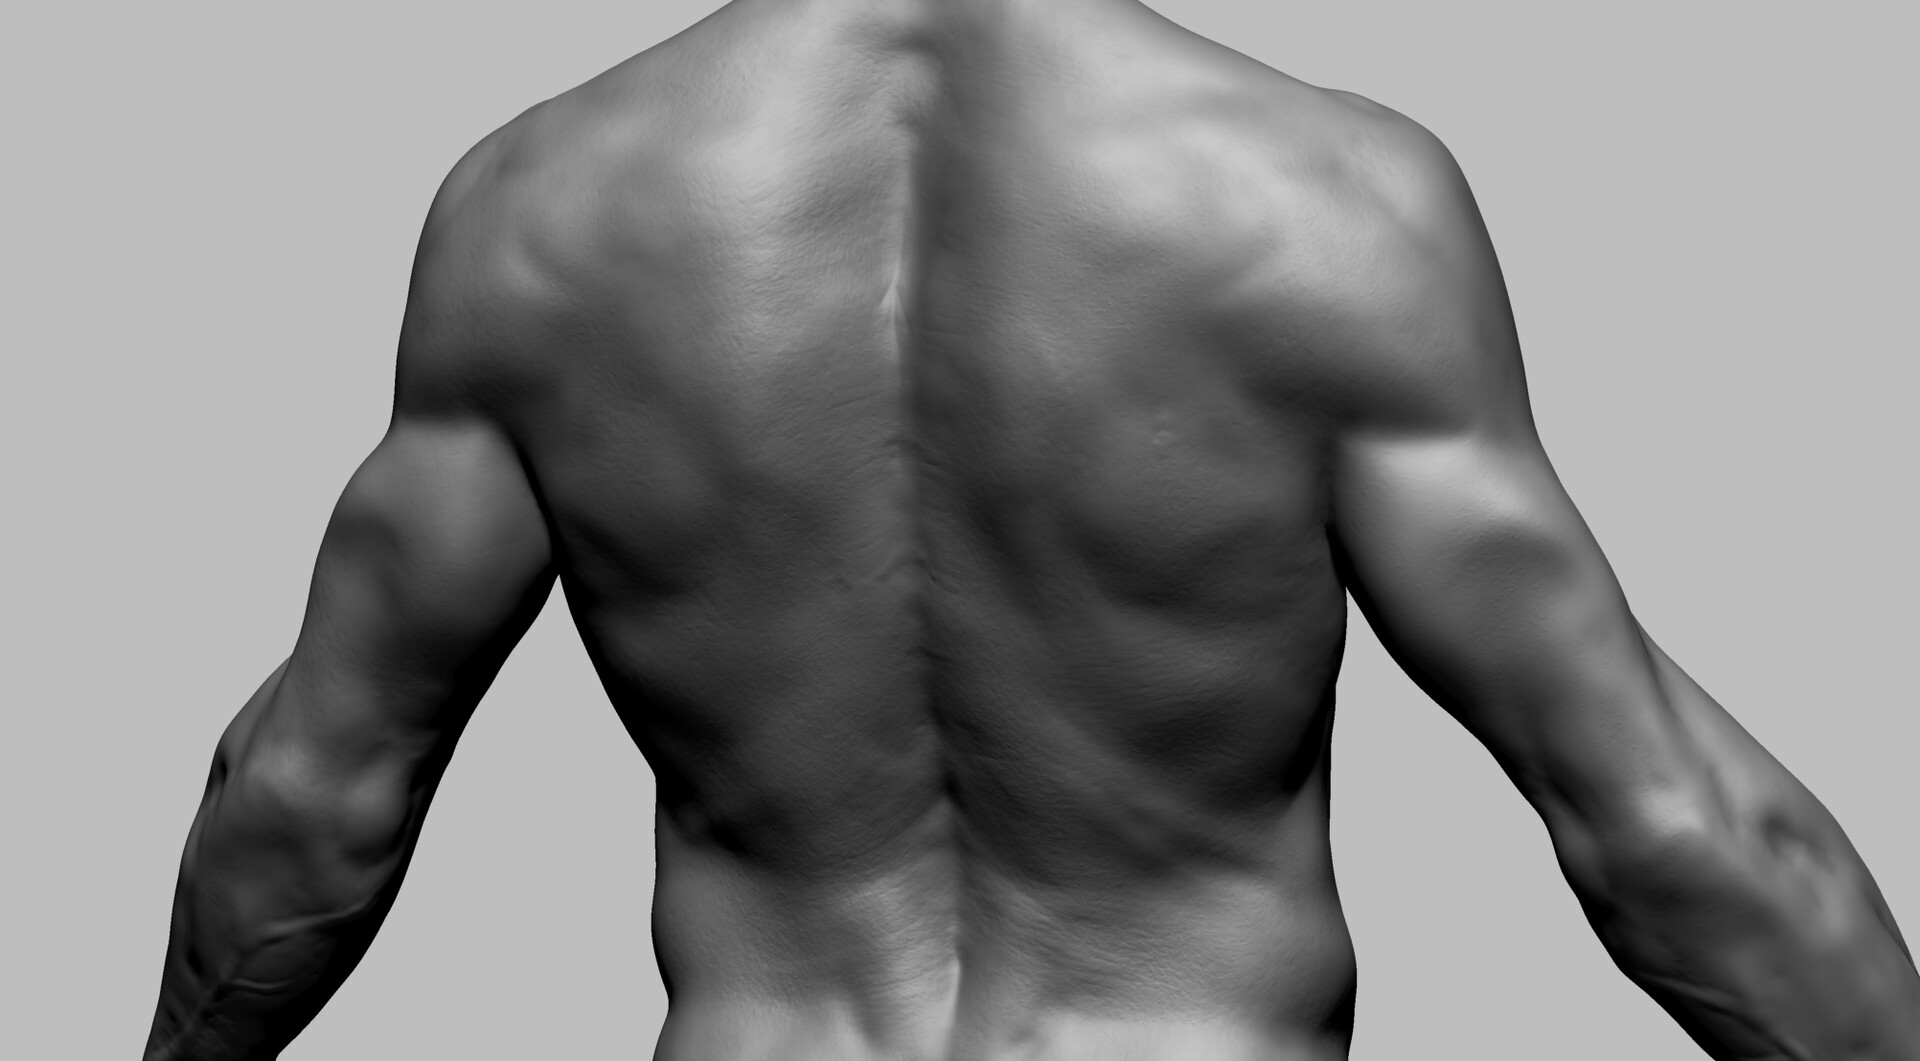 ArtStation - ZBrush Anatomy Tutorial: Sculpting The Back And Torso